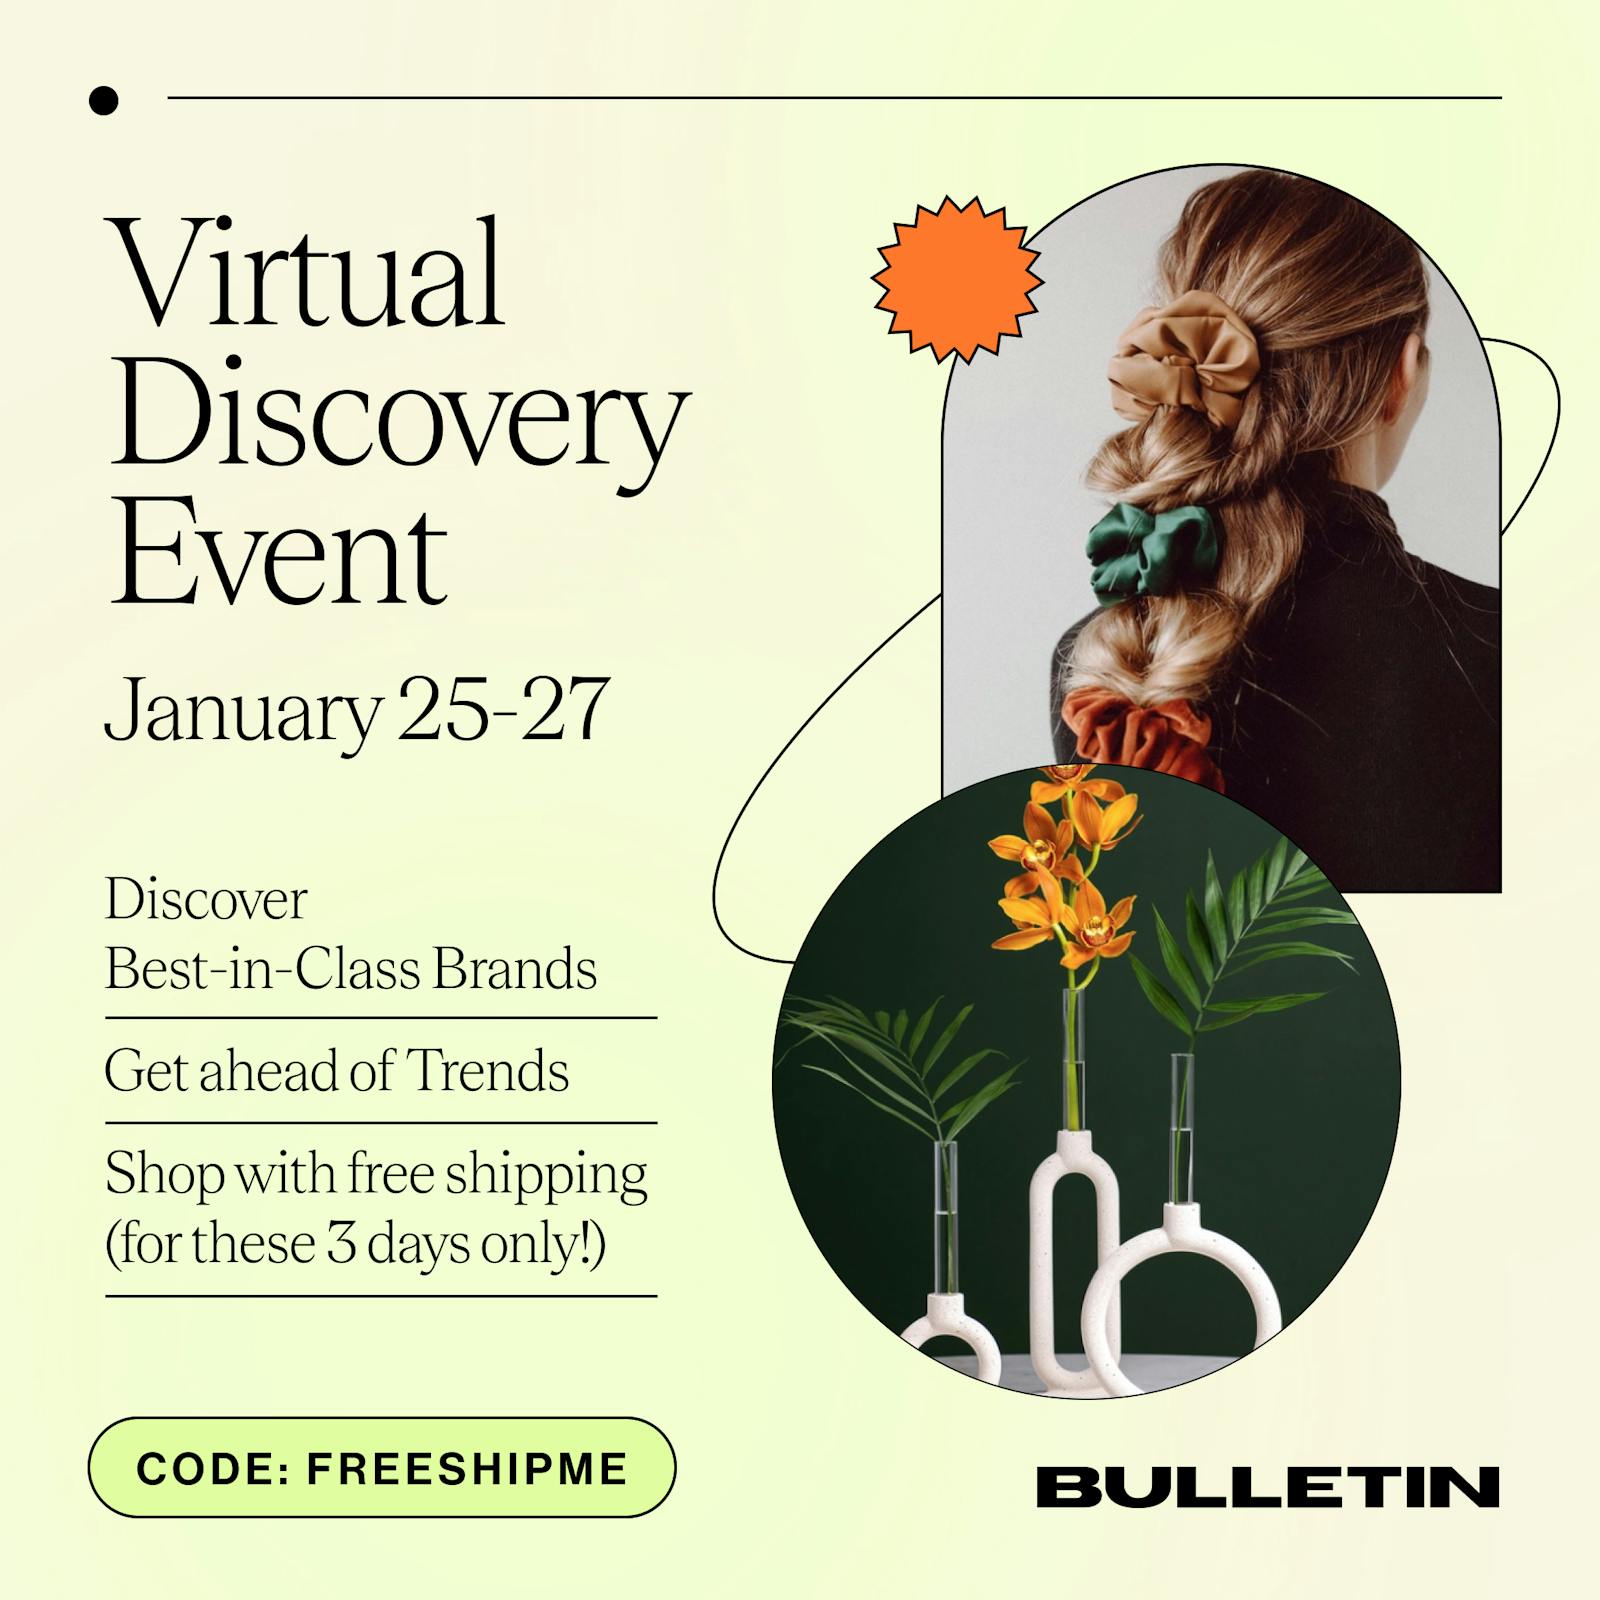 Bulletin's 2022 Virtual Discovery Event